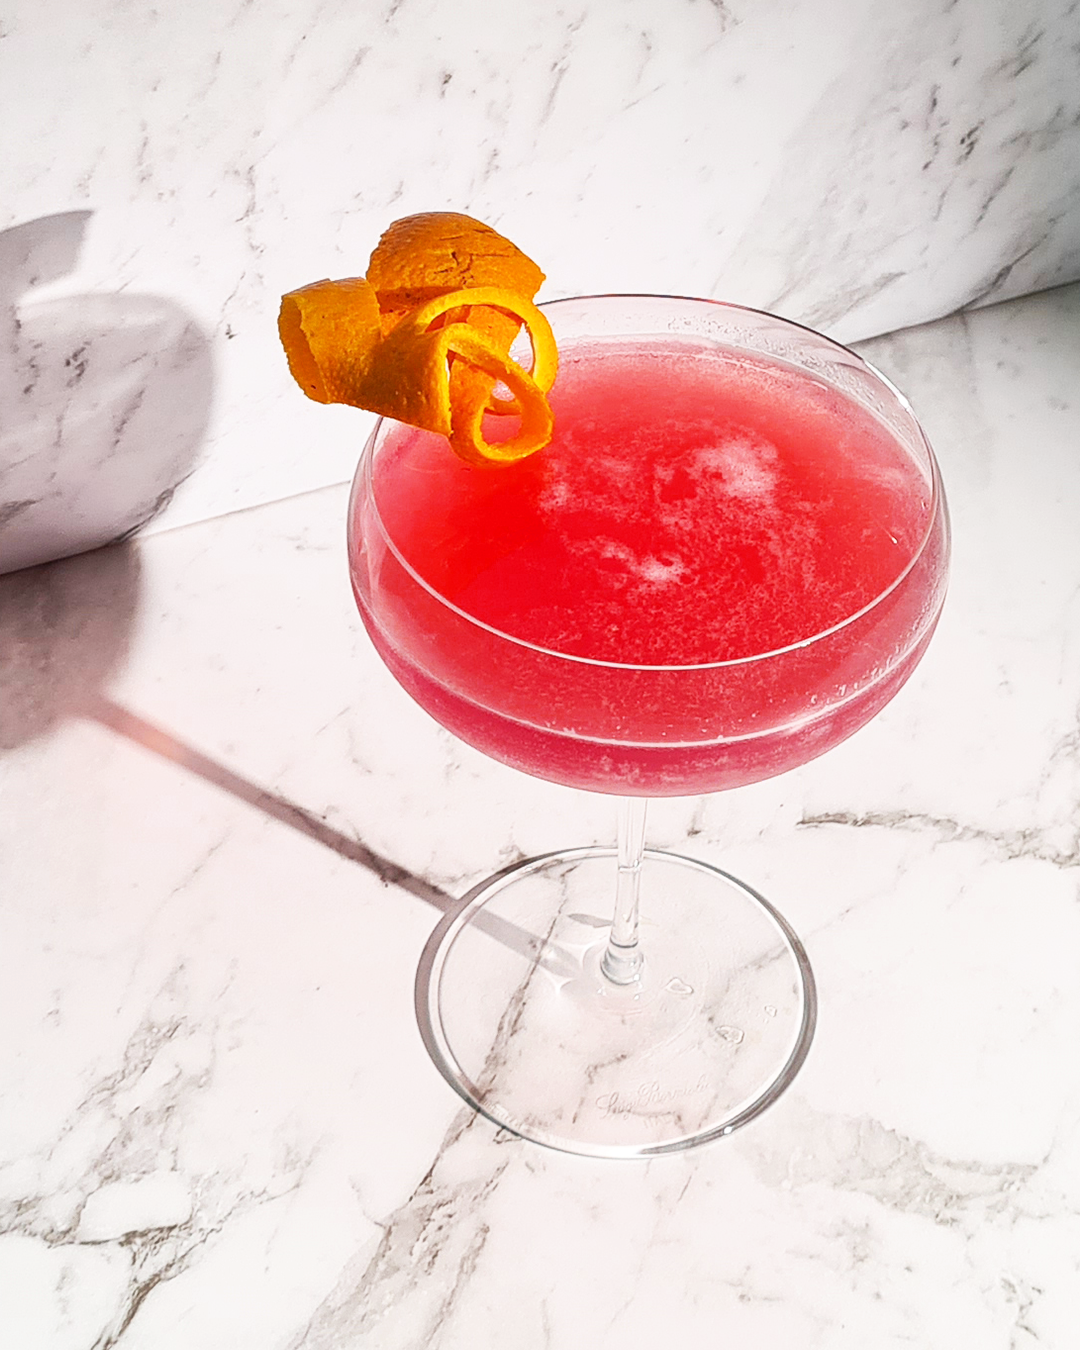 Image of a non-alcoholic cosmopolitan mocktail. It is pink with an orange ring as garnish on the rim of the glass.